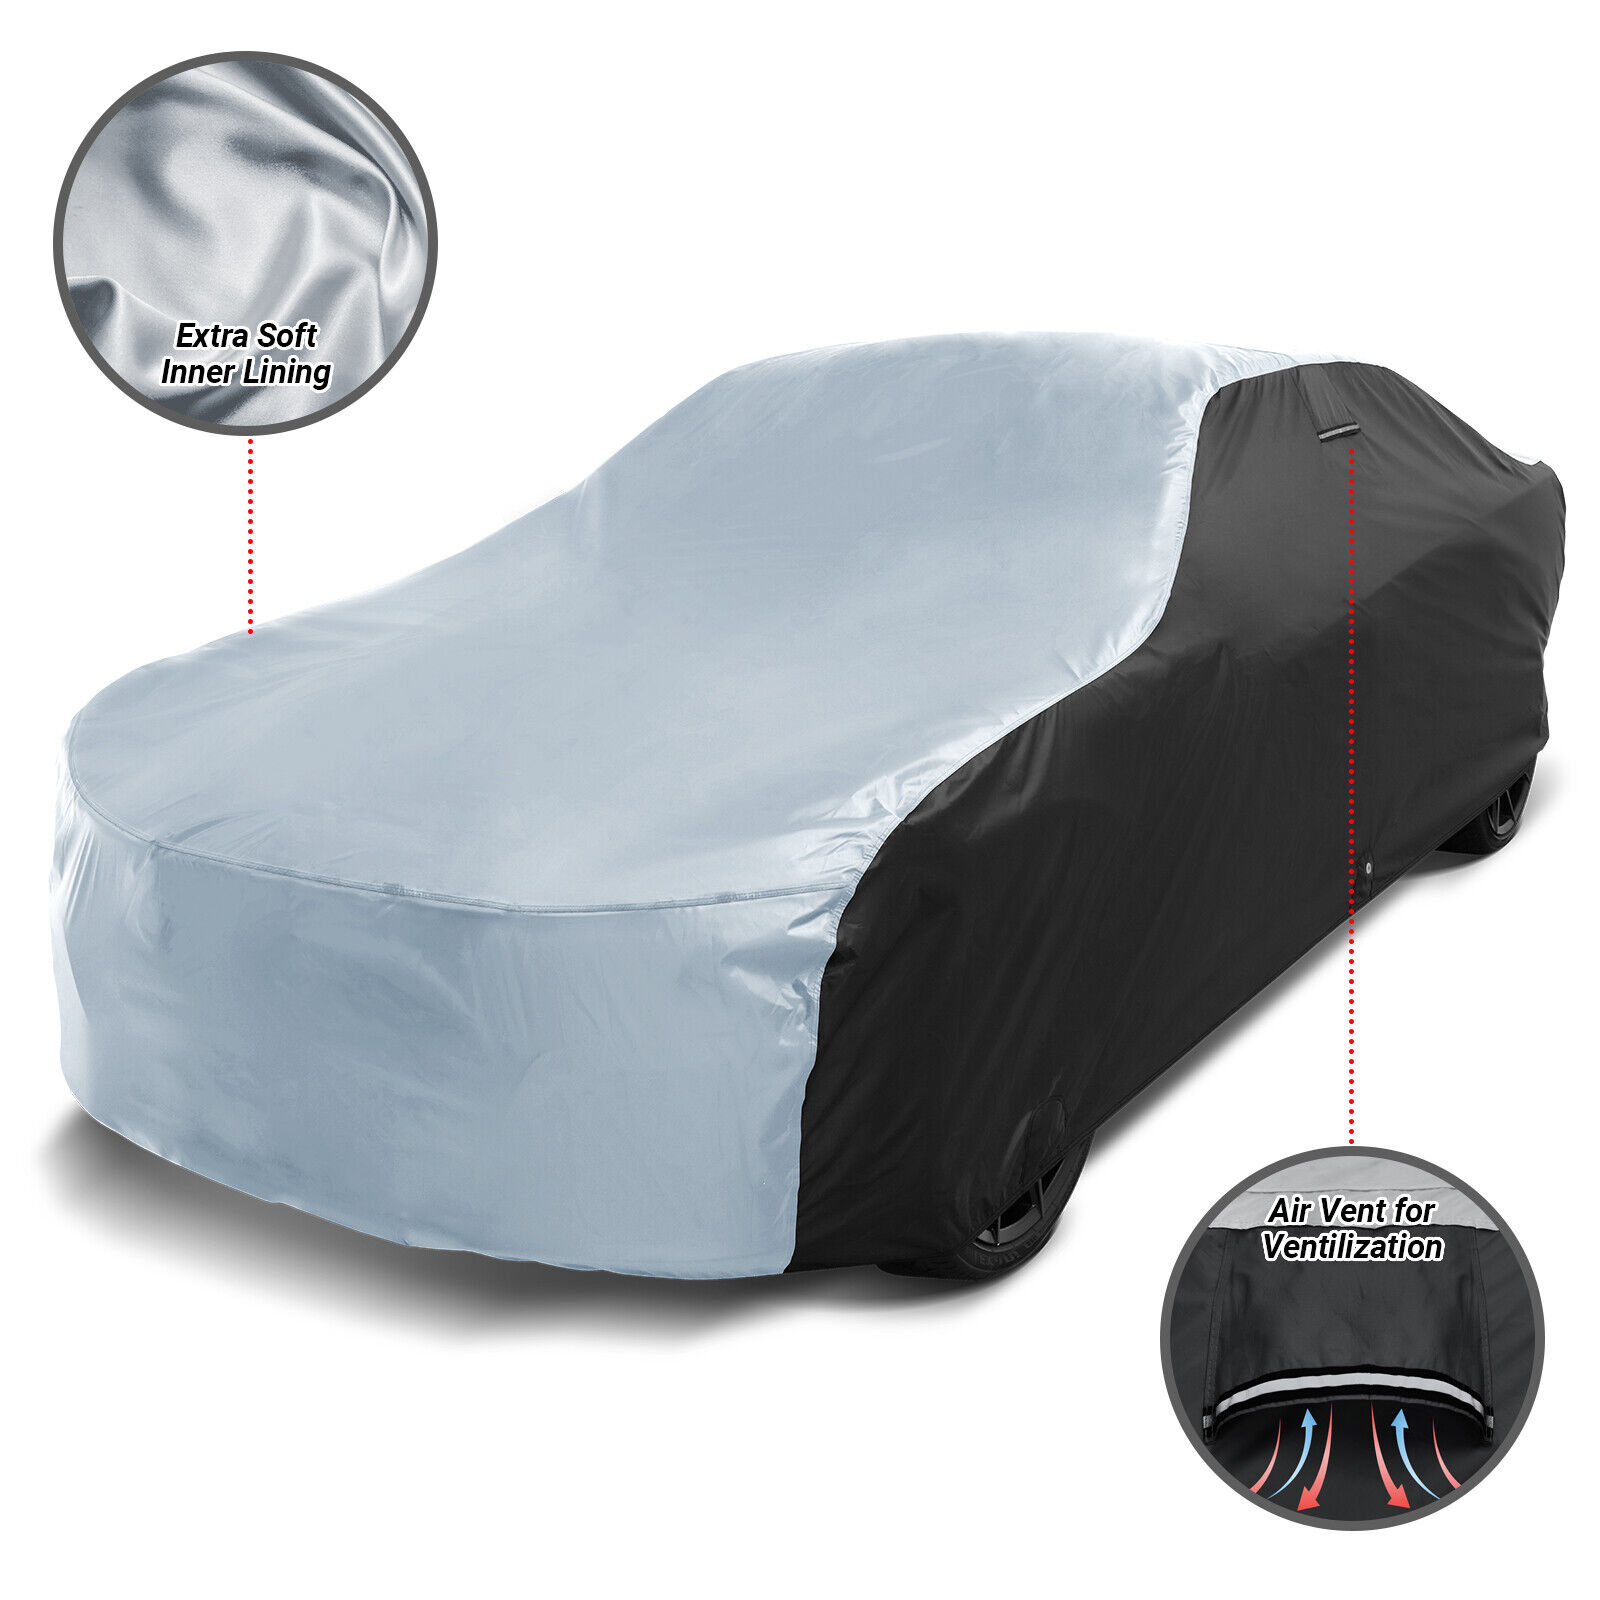 For PLYMOUTH [BELVEDERE] Custom-Fit Outdoor Waterproof All Weather Car Cover